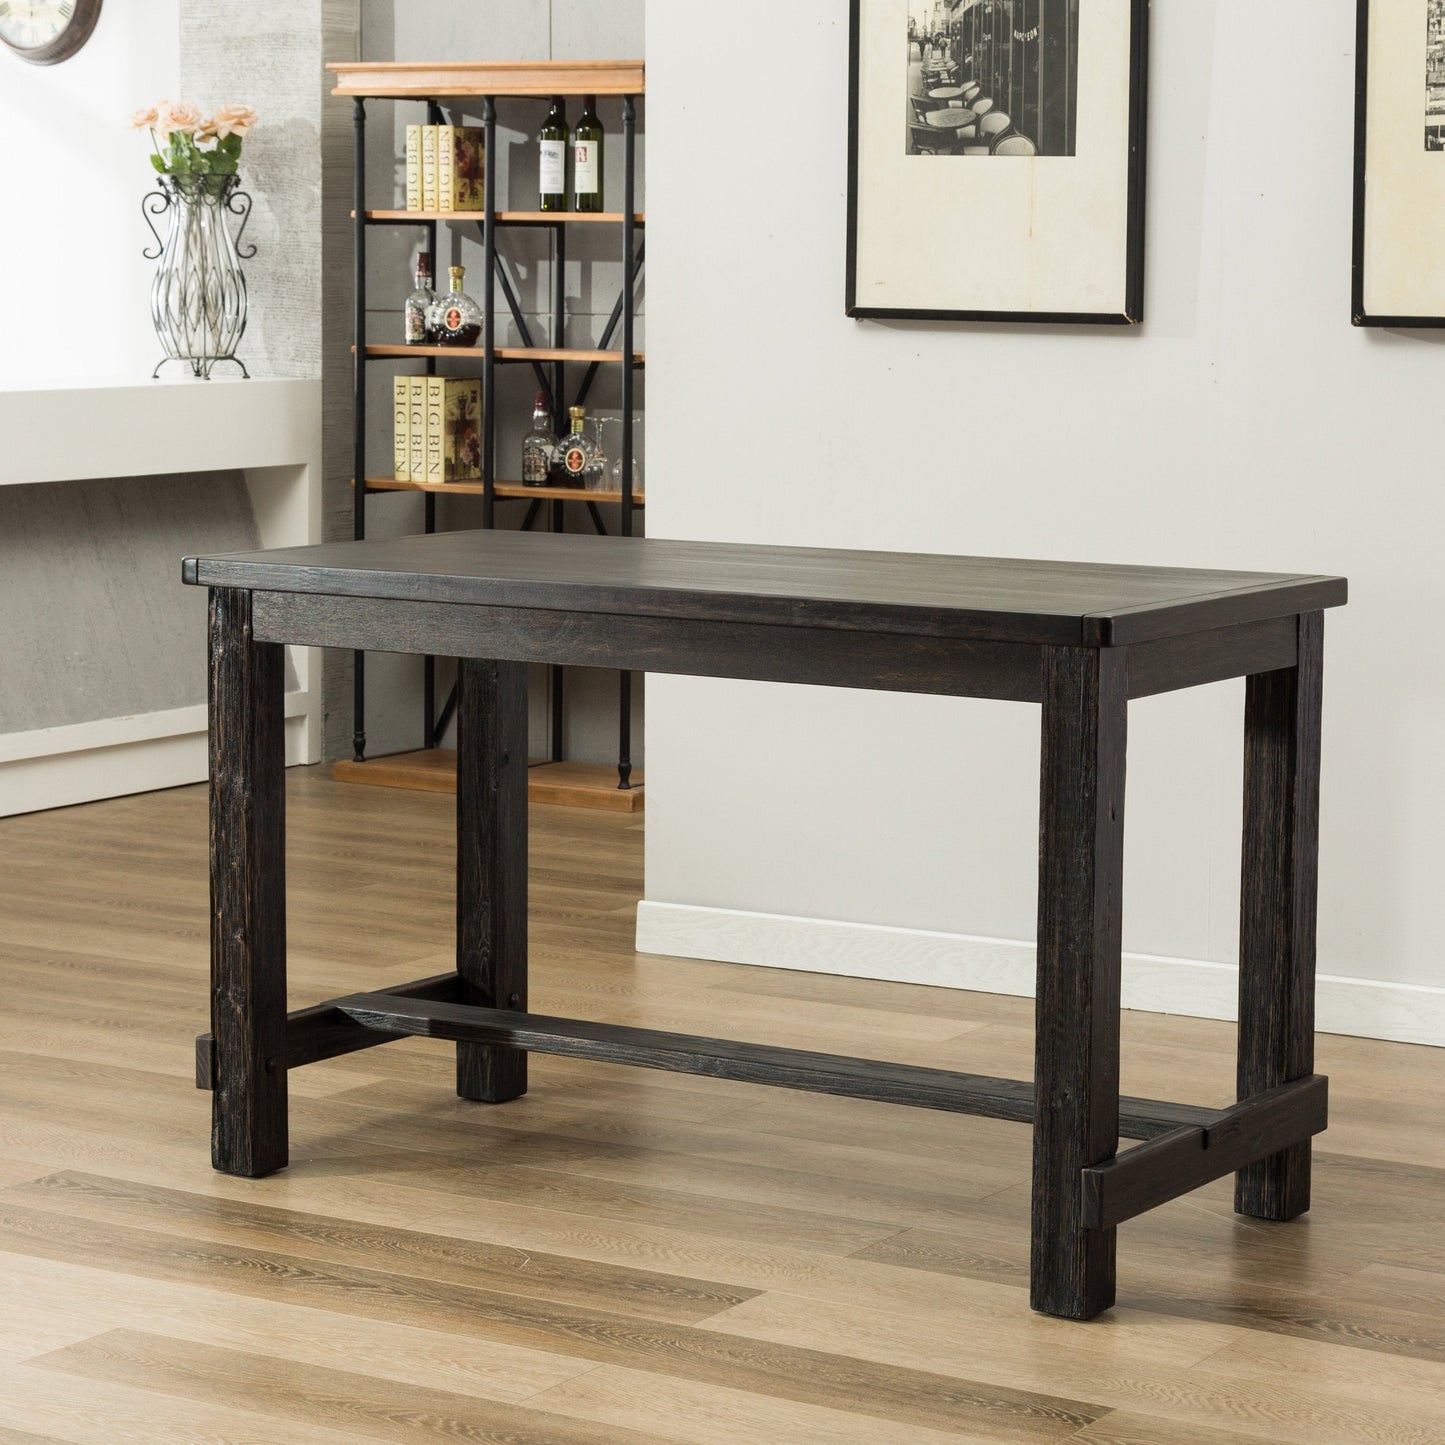 Lotusville Antique Black Finish Rectangular Wood Counter Height Dining Table